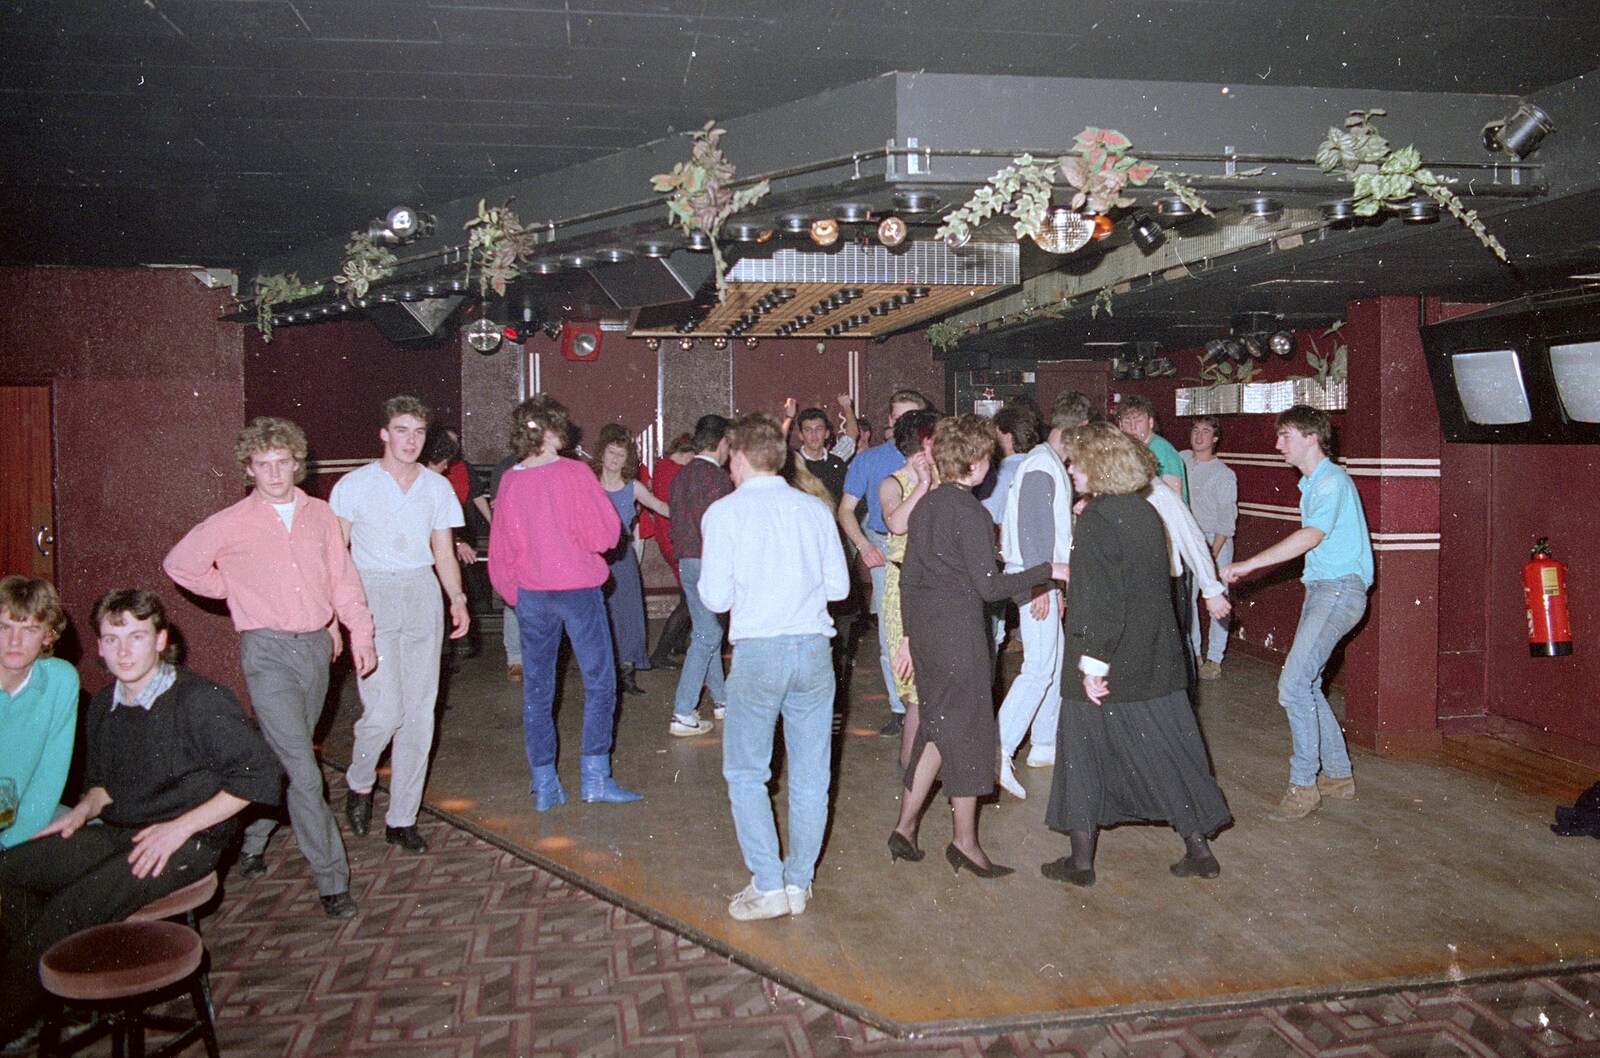 The tiny Snob's dancefloor from Uni: A Party in Snobs Nightclub, Mayflower Street, Plymouth - 18th October 1986